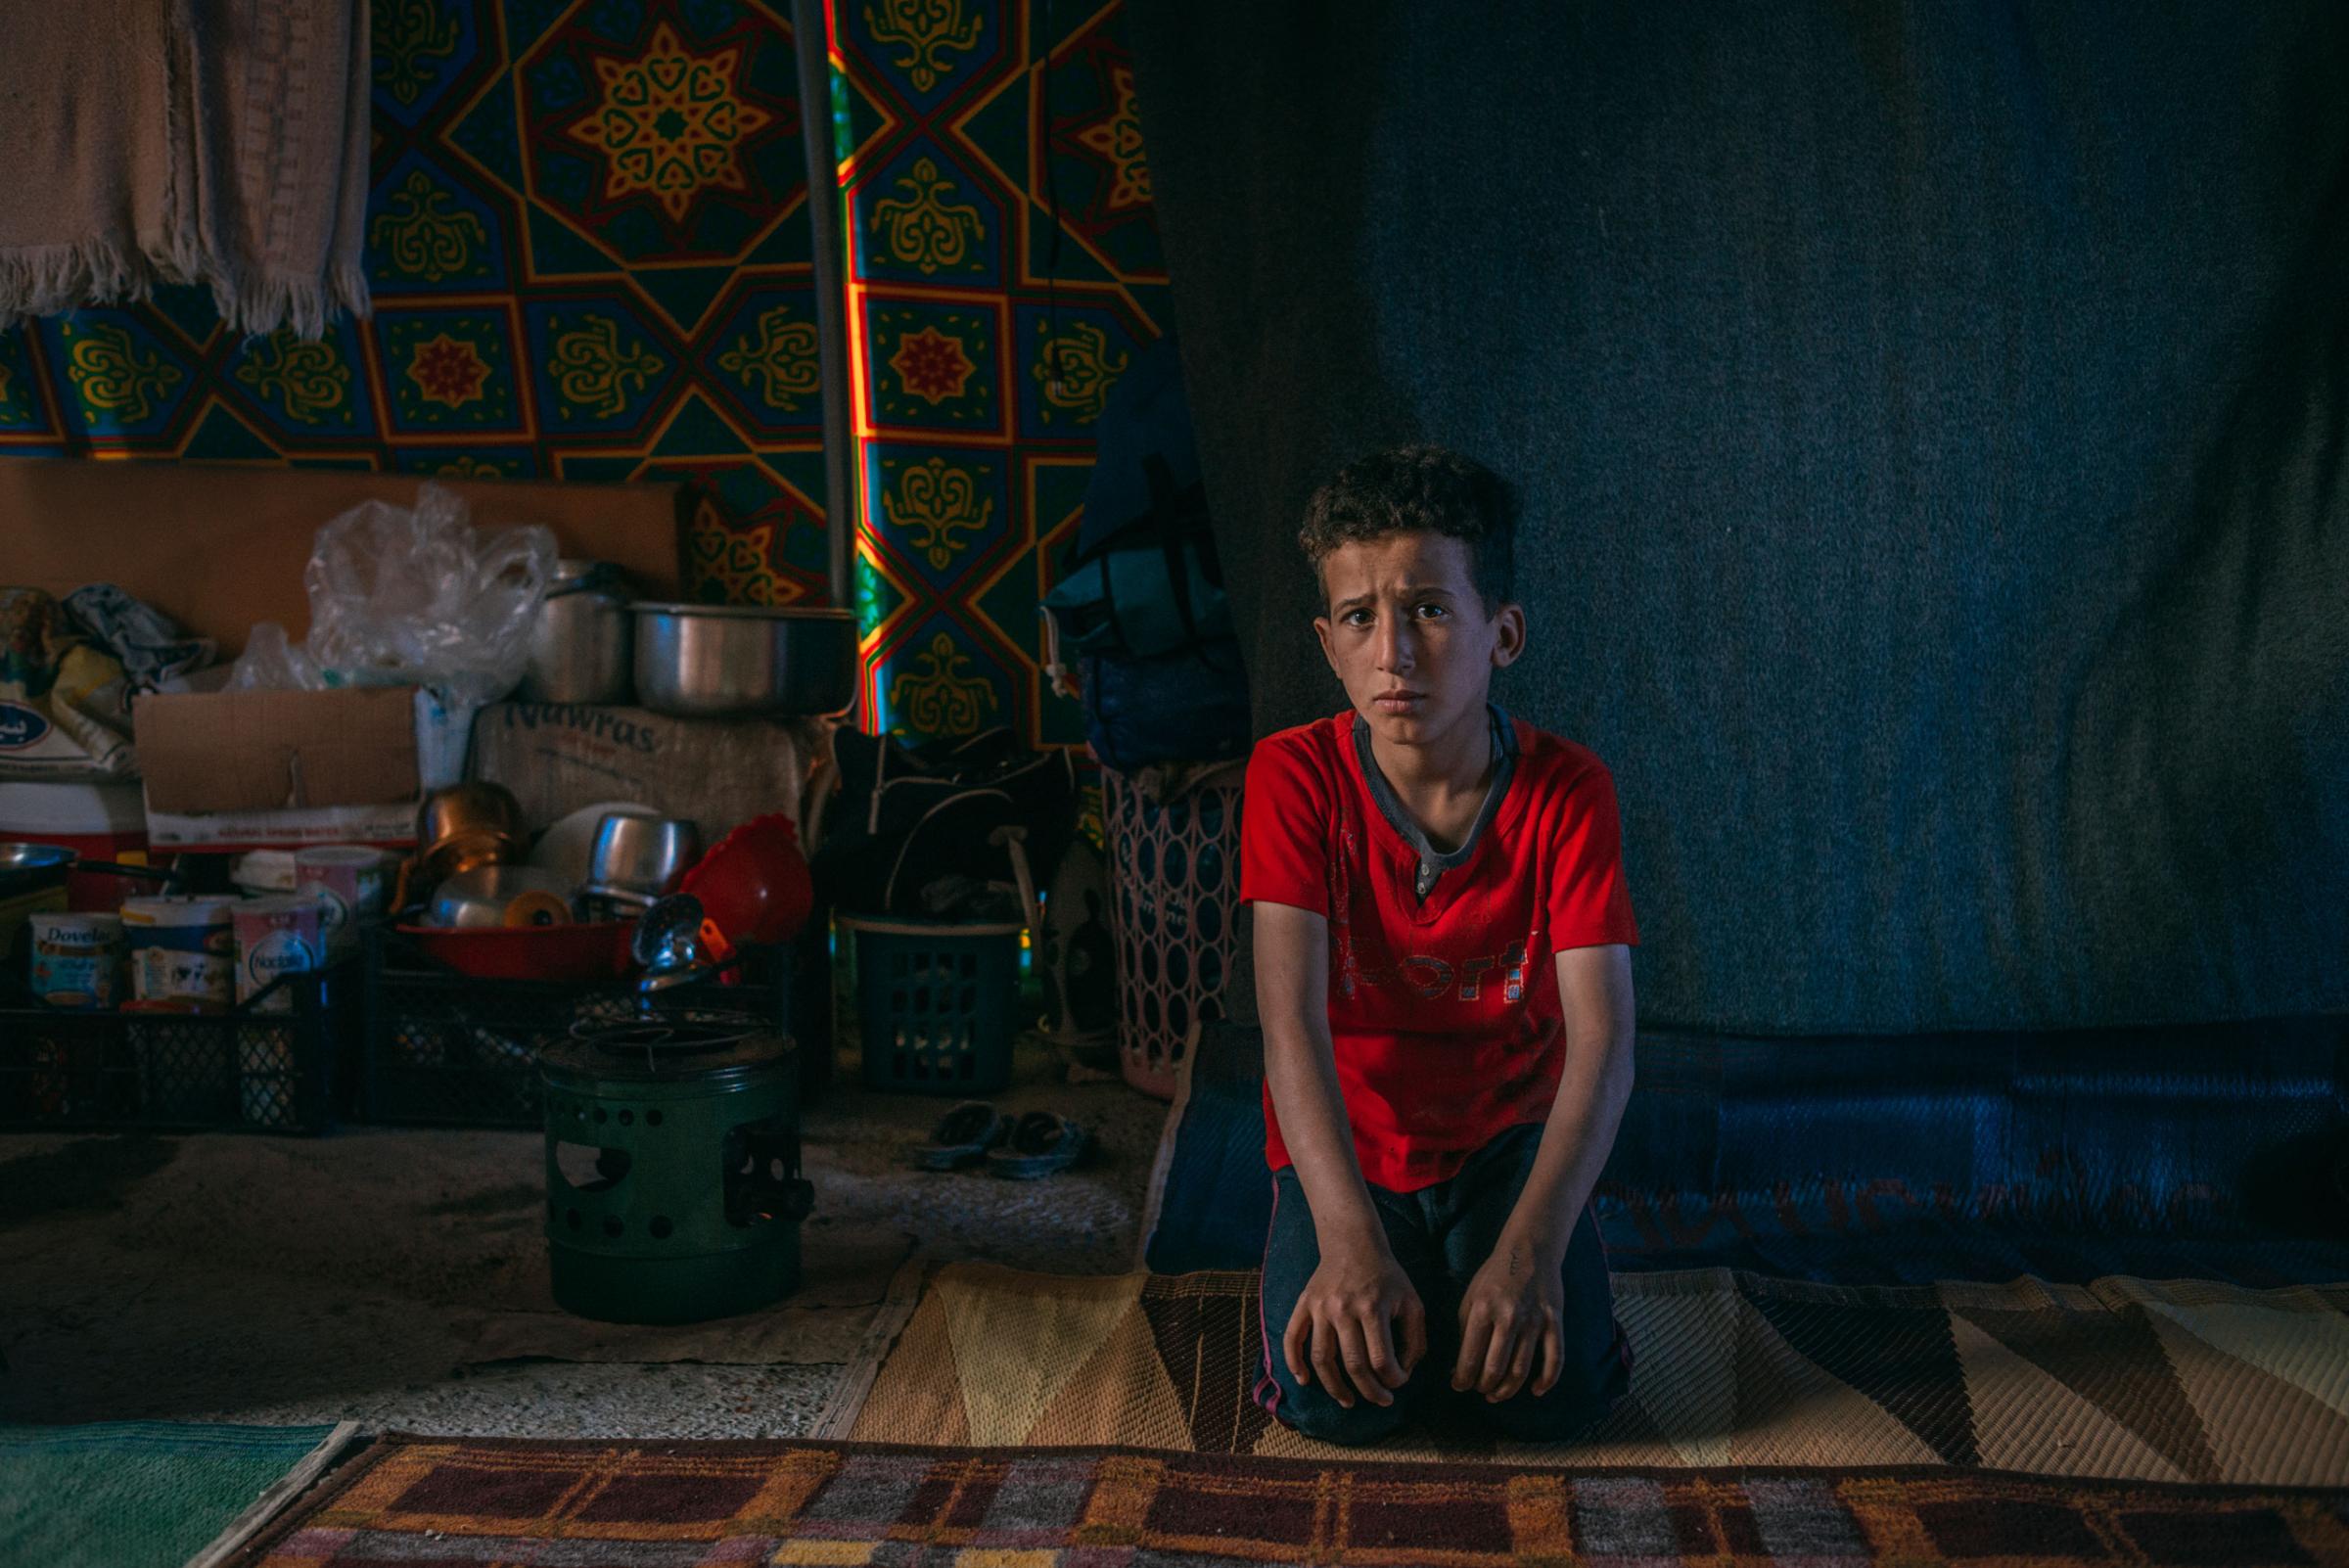 Hassan Falah Hamid, 10, lives in the Hamam al-Alil displacement camp south of Mosul. On April 6, 2017, he answered a few questions about his recent days in this war zone. His most recent meal? Fava beans. What does he think about at night? He was afraid of ISIS and the shelling. His favorite toy? He doesn't have toys in the camp, but back at home it was a bicycle. What does he want to be when he grows up? A teacher.